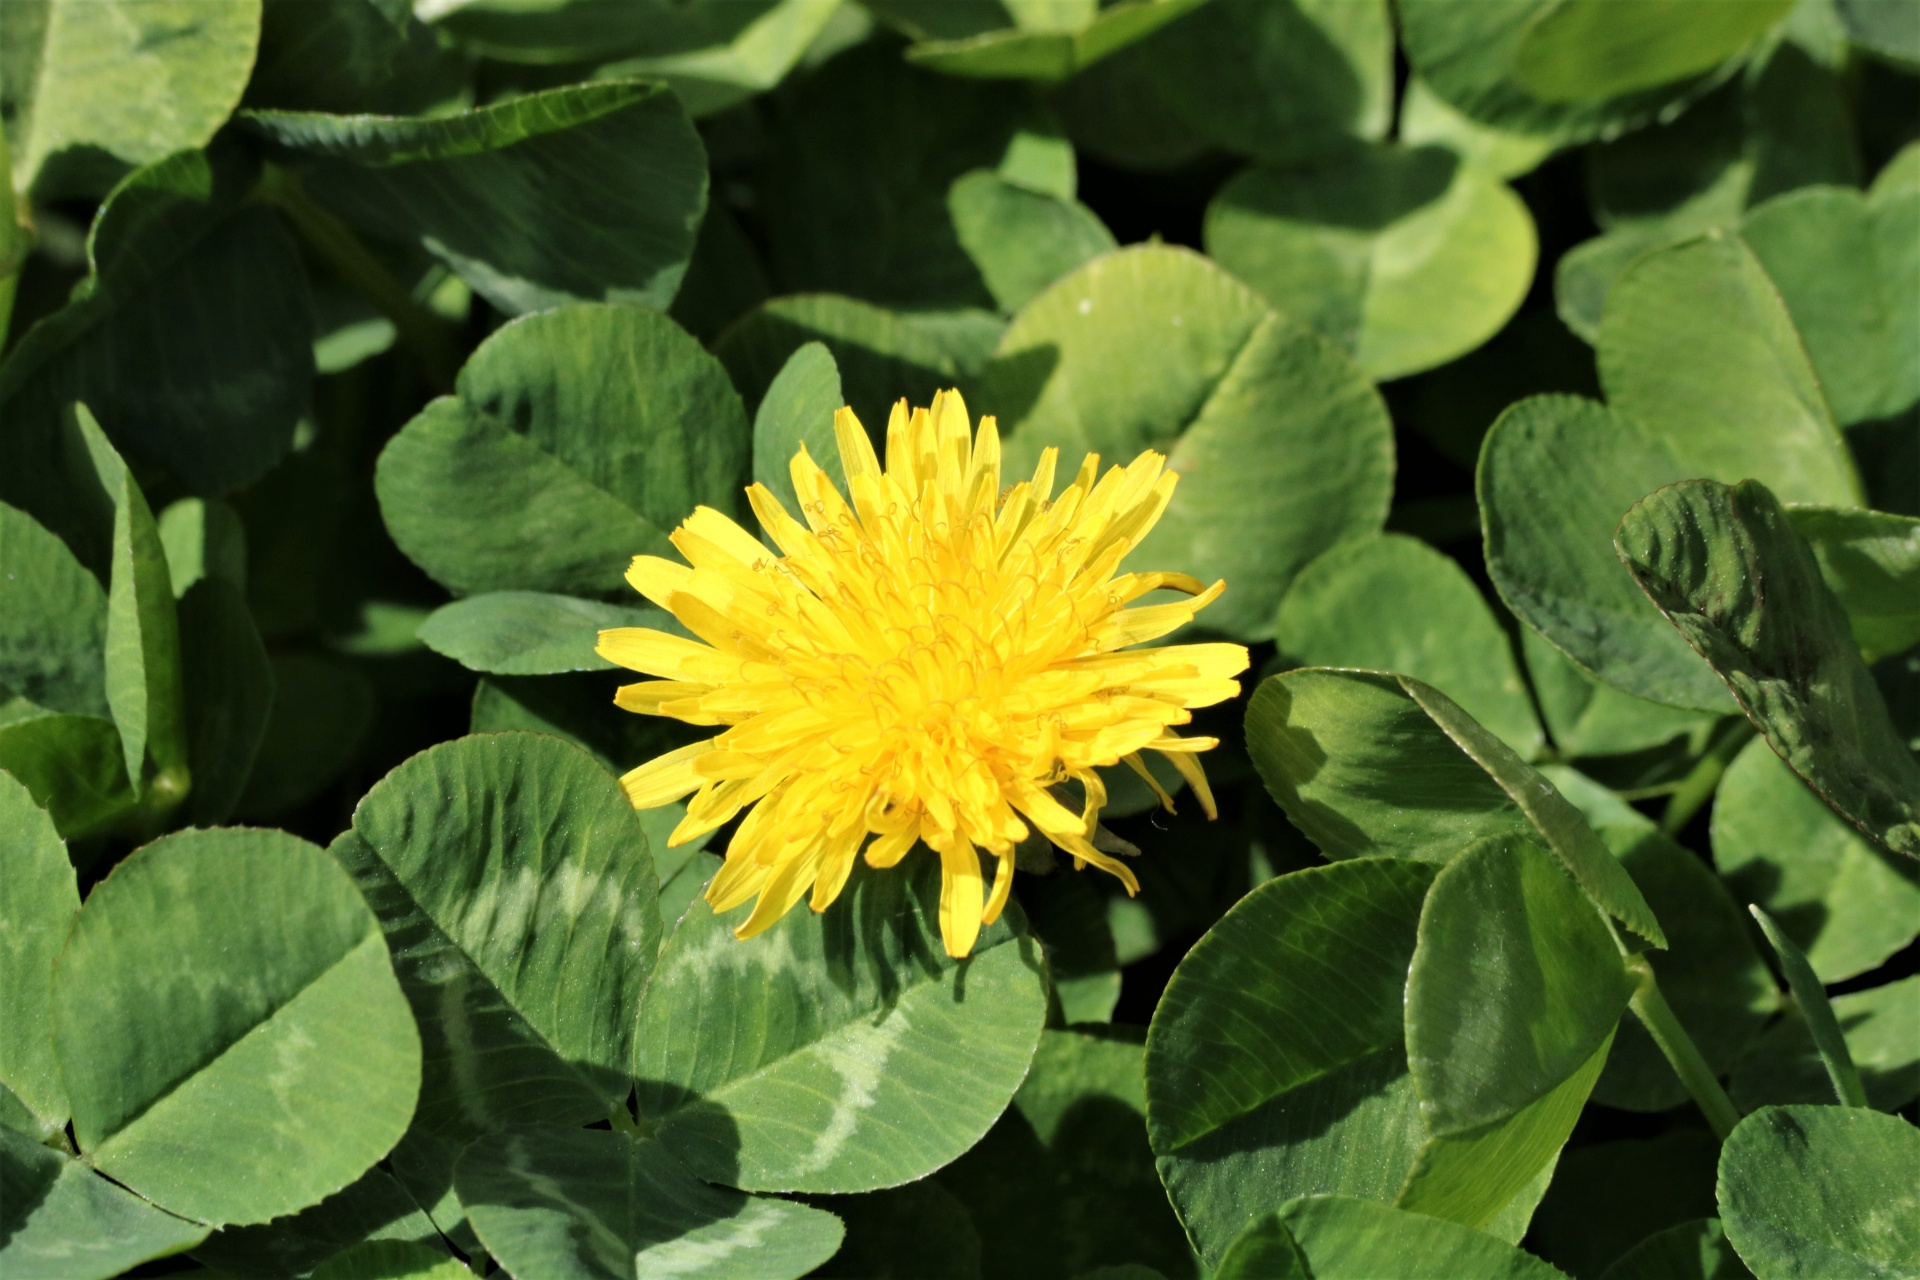 Close-up of a dandelion bloom surrounded by green clover.